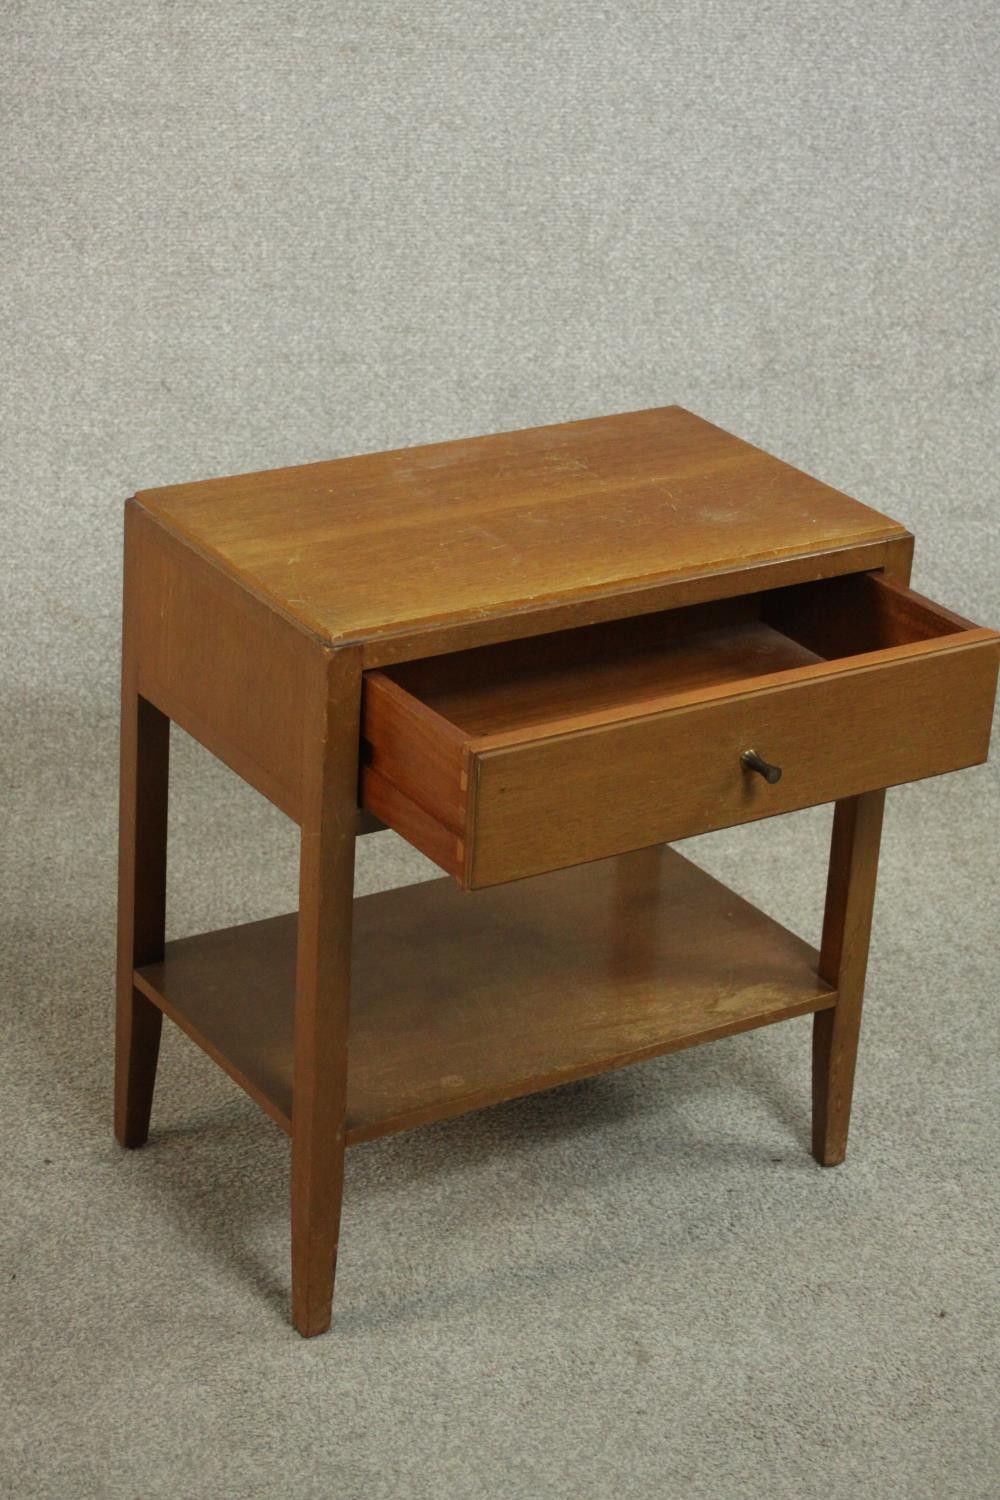 A mid 20th century Heal's style oak bedside table, with a single drawer over an undertier on - Image 4 of 4